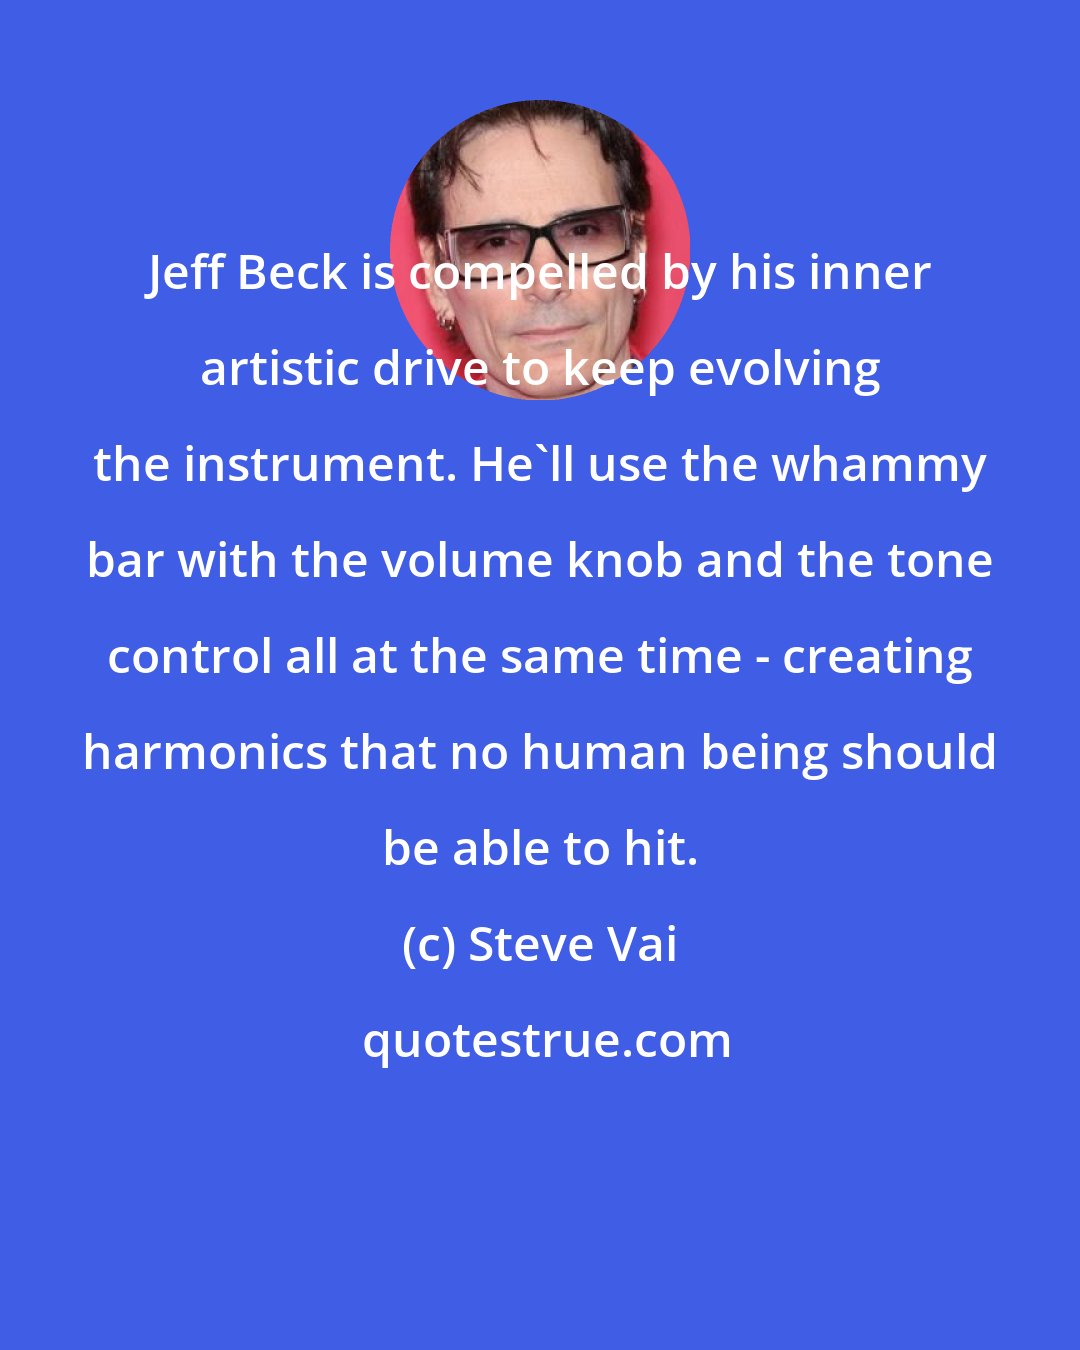 Steve Vai: Jeff Beck is compelled by his inner artistic drive to keep evolving the instrument. He'll use the whammy bar with the volume knob and the tone control all at the same time - creating harmonics that no human being should be able to hit.